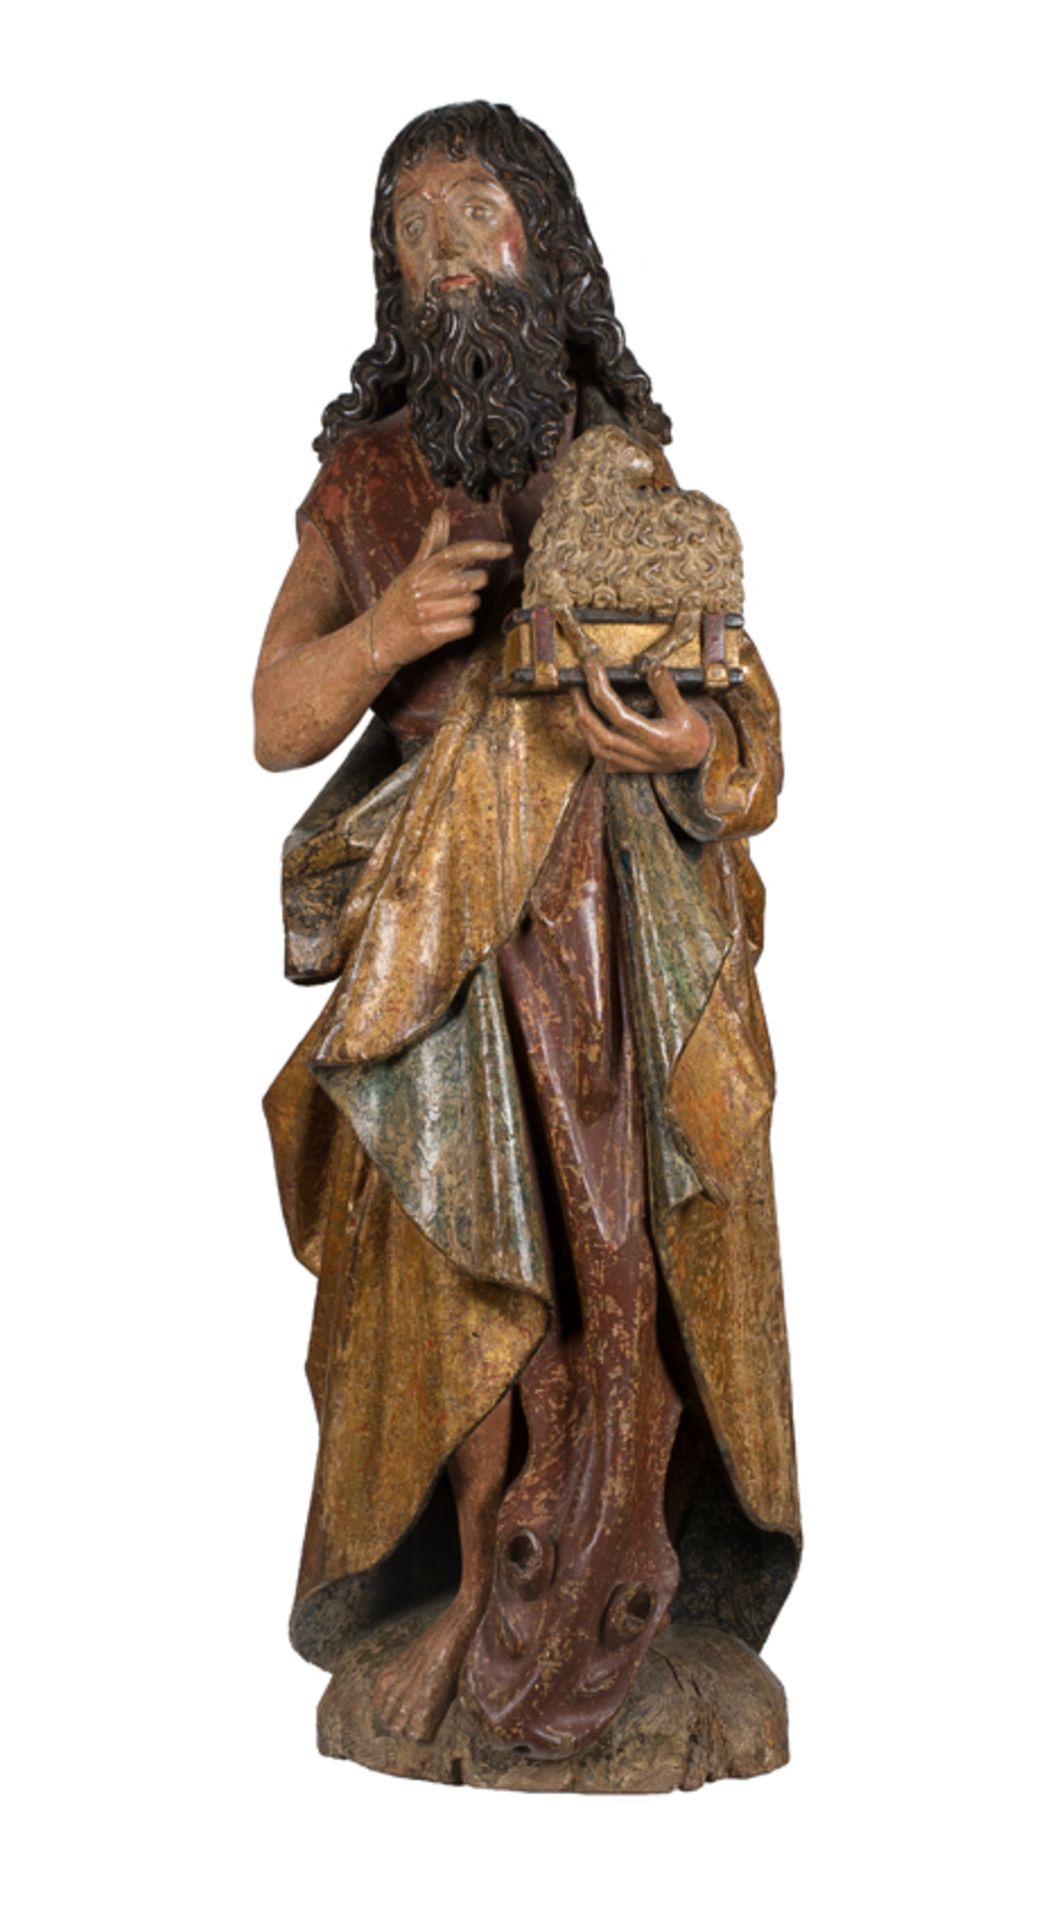 "Saint John the Baptist". Carved, polychromed and gilded wooden sculpture. Anonymous. Northern Euro